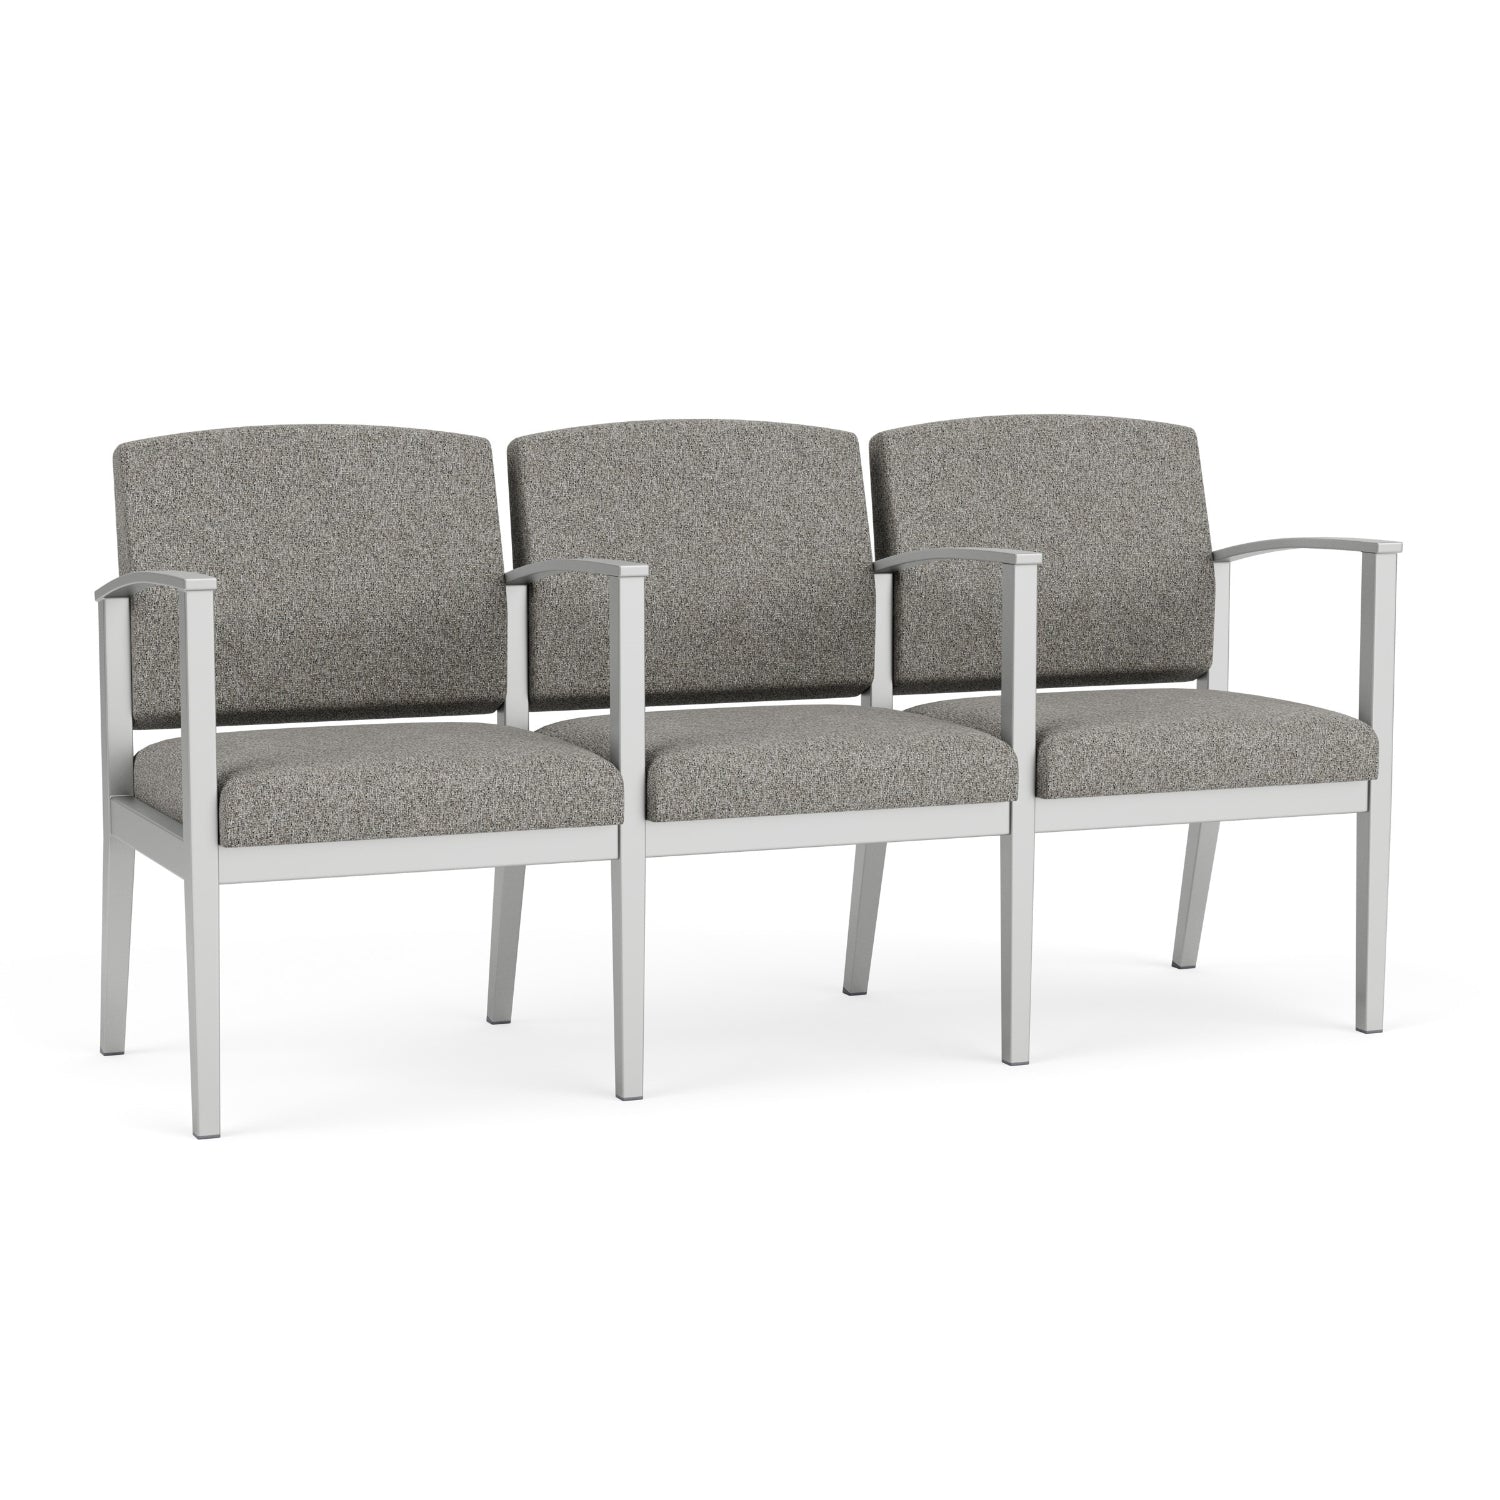 Amherst Steel Collection Reception Seating, 3 Seats with Center Arms, Standard Fabric Upholstery, FREE SHIPPING